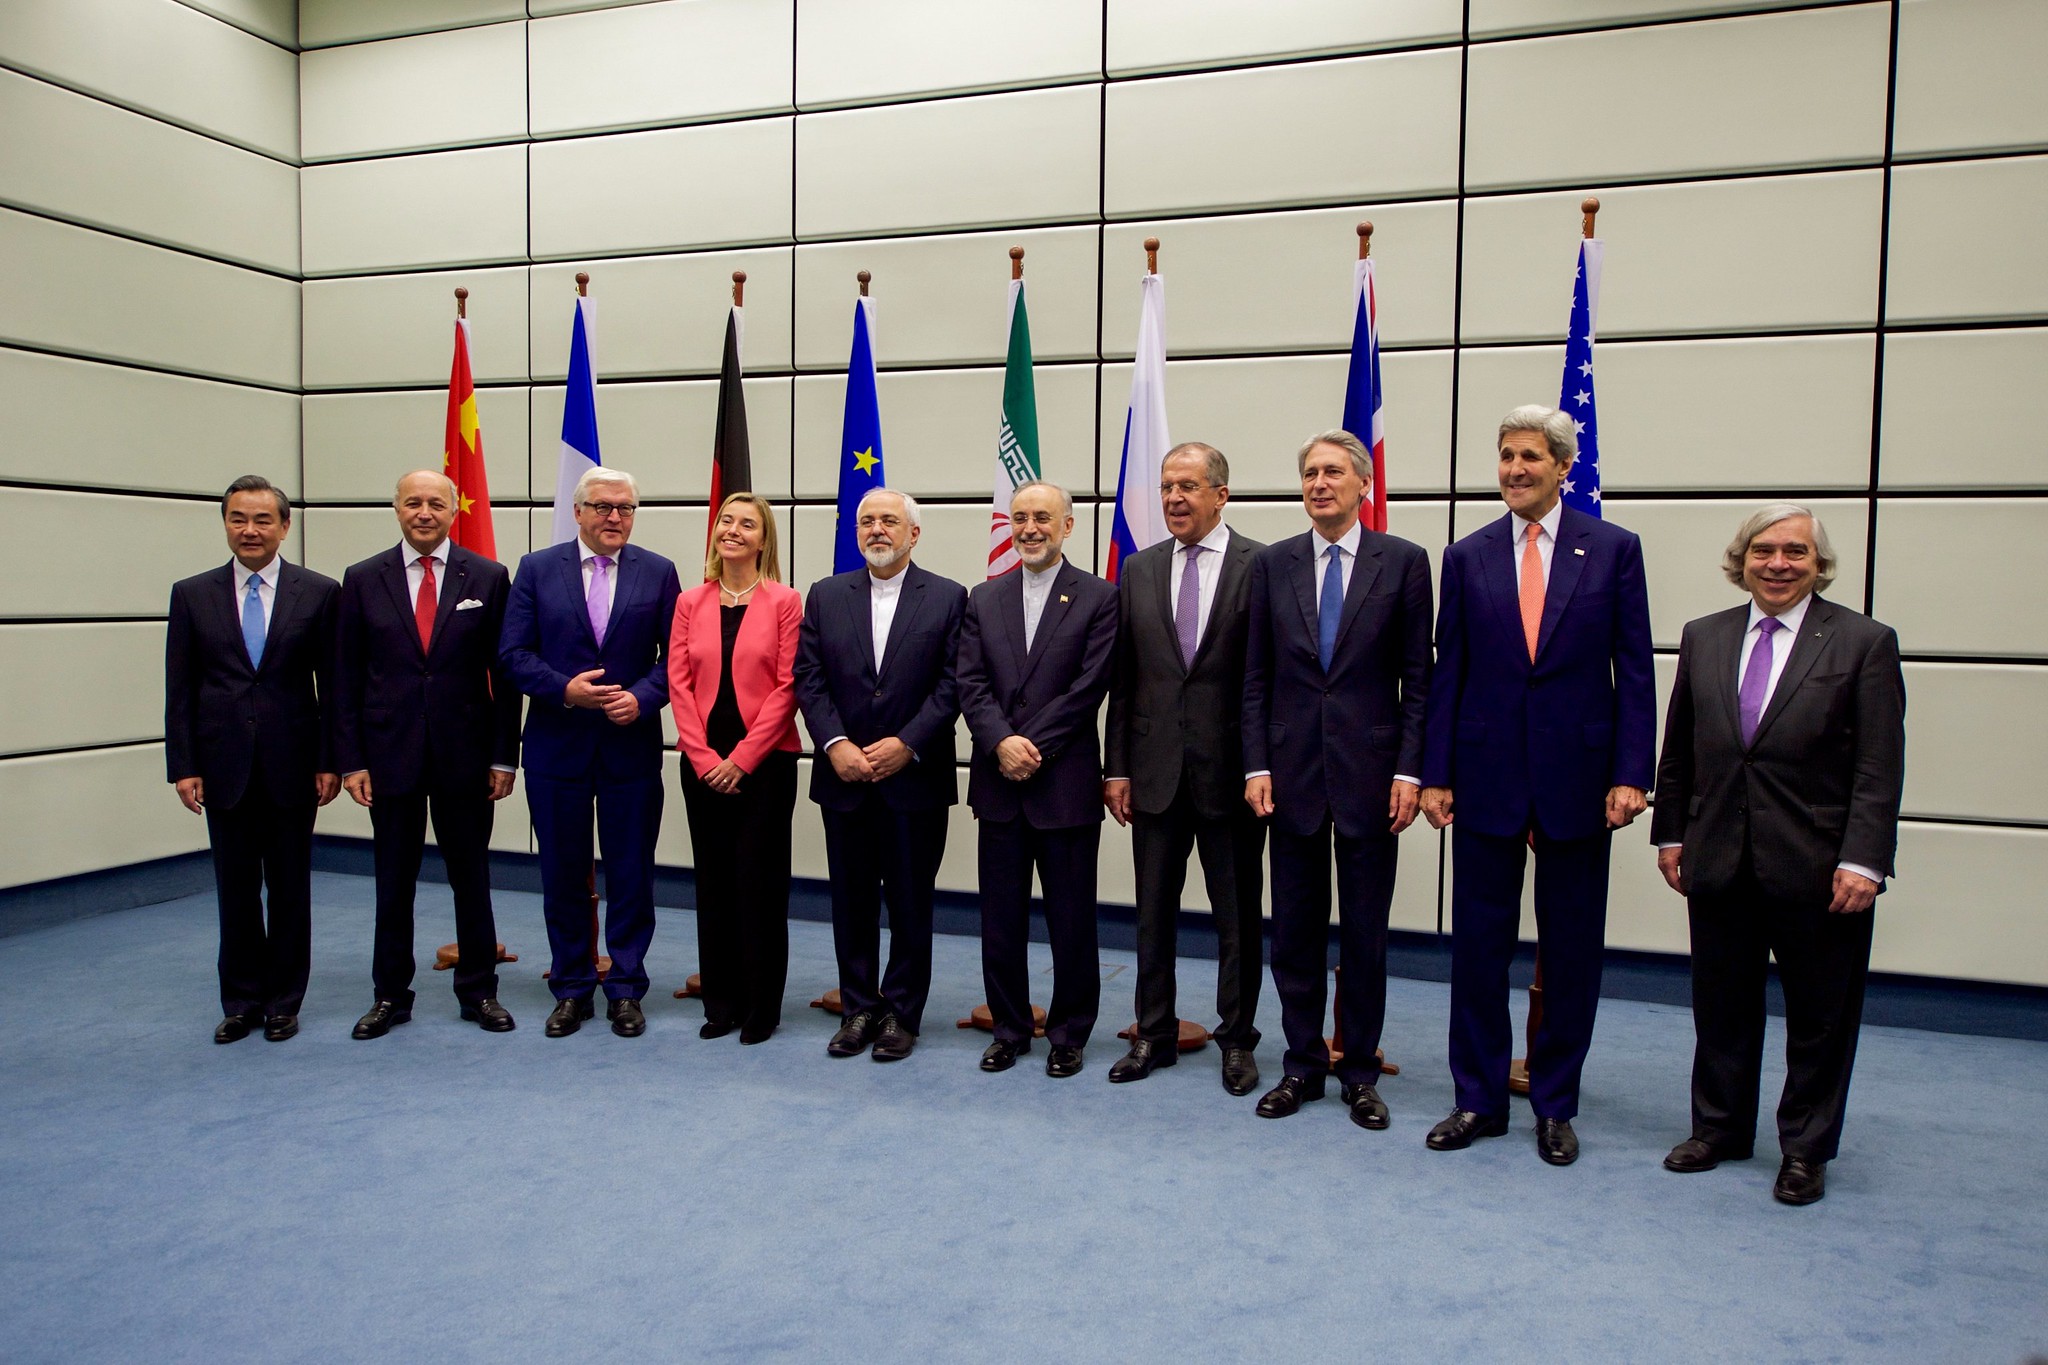 Group photo of P5+1, E.U., and Iranian officials before final plenary of Iran Nuclear Negotiations in Austria, 2015. Photo by U.S. State Department, Flickr. 